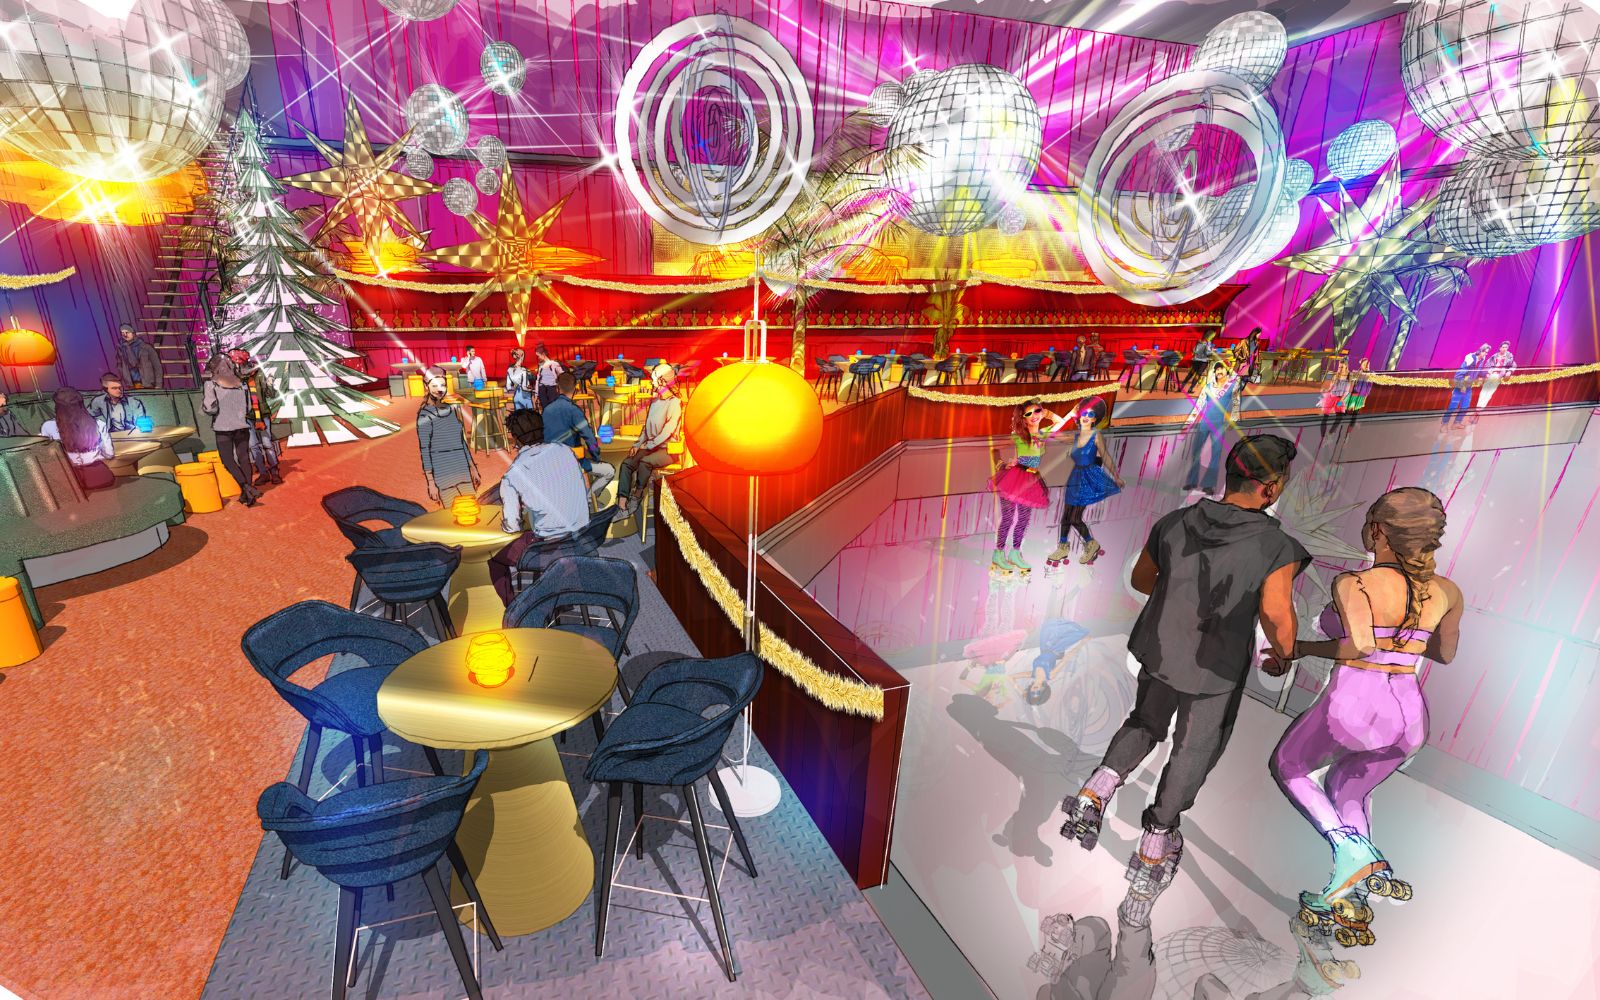 The Rollerscape roller skating rink is coming to London